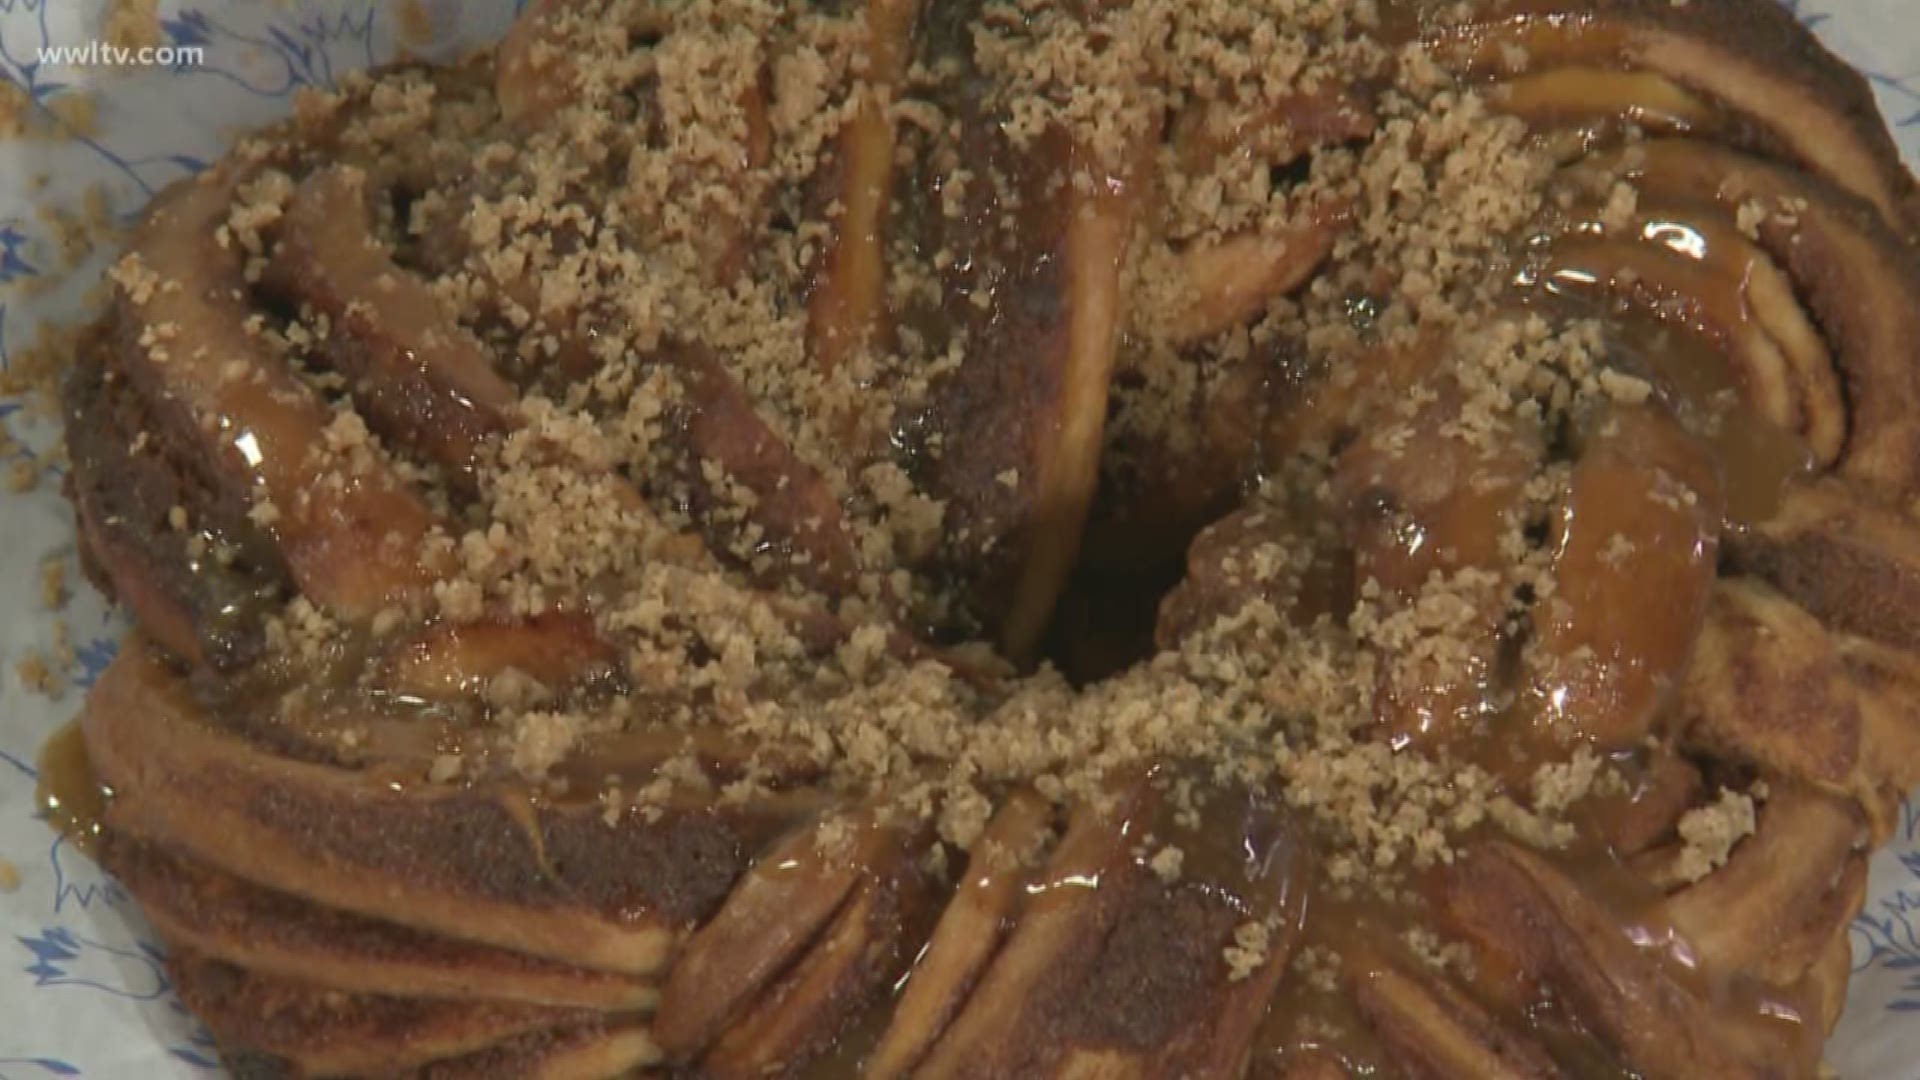 We are highlighting unusual King Cakes around the city and Saba tops the list with their Babka King Cake.